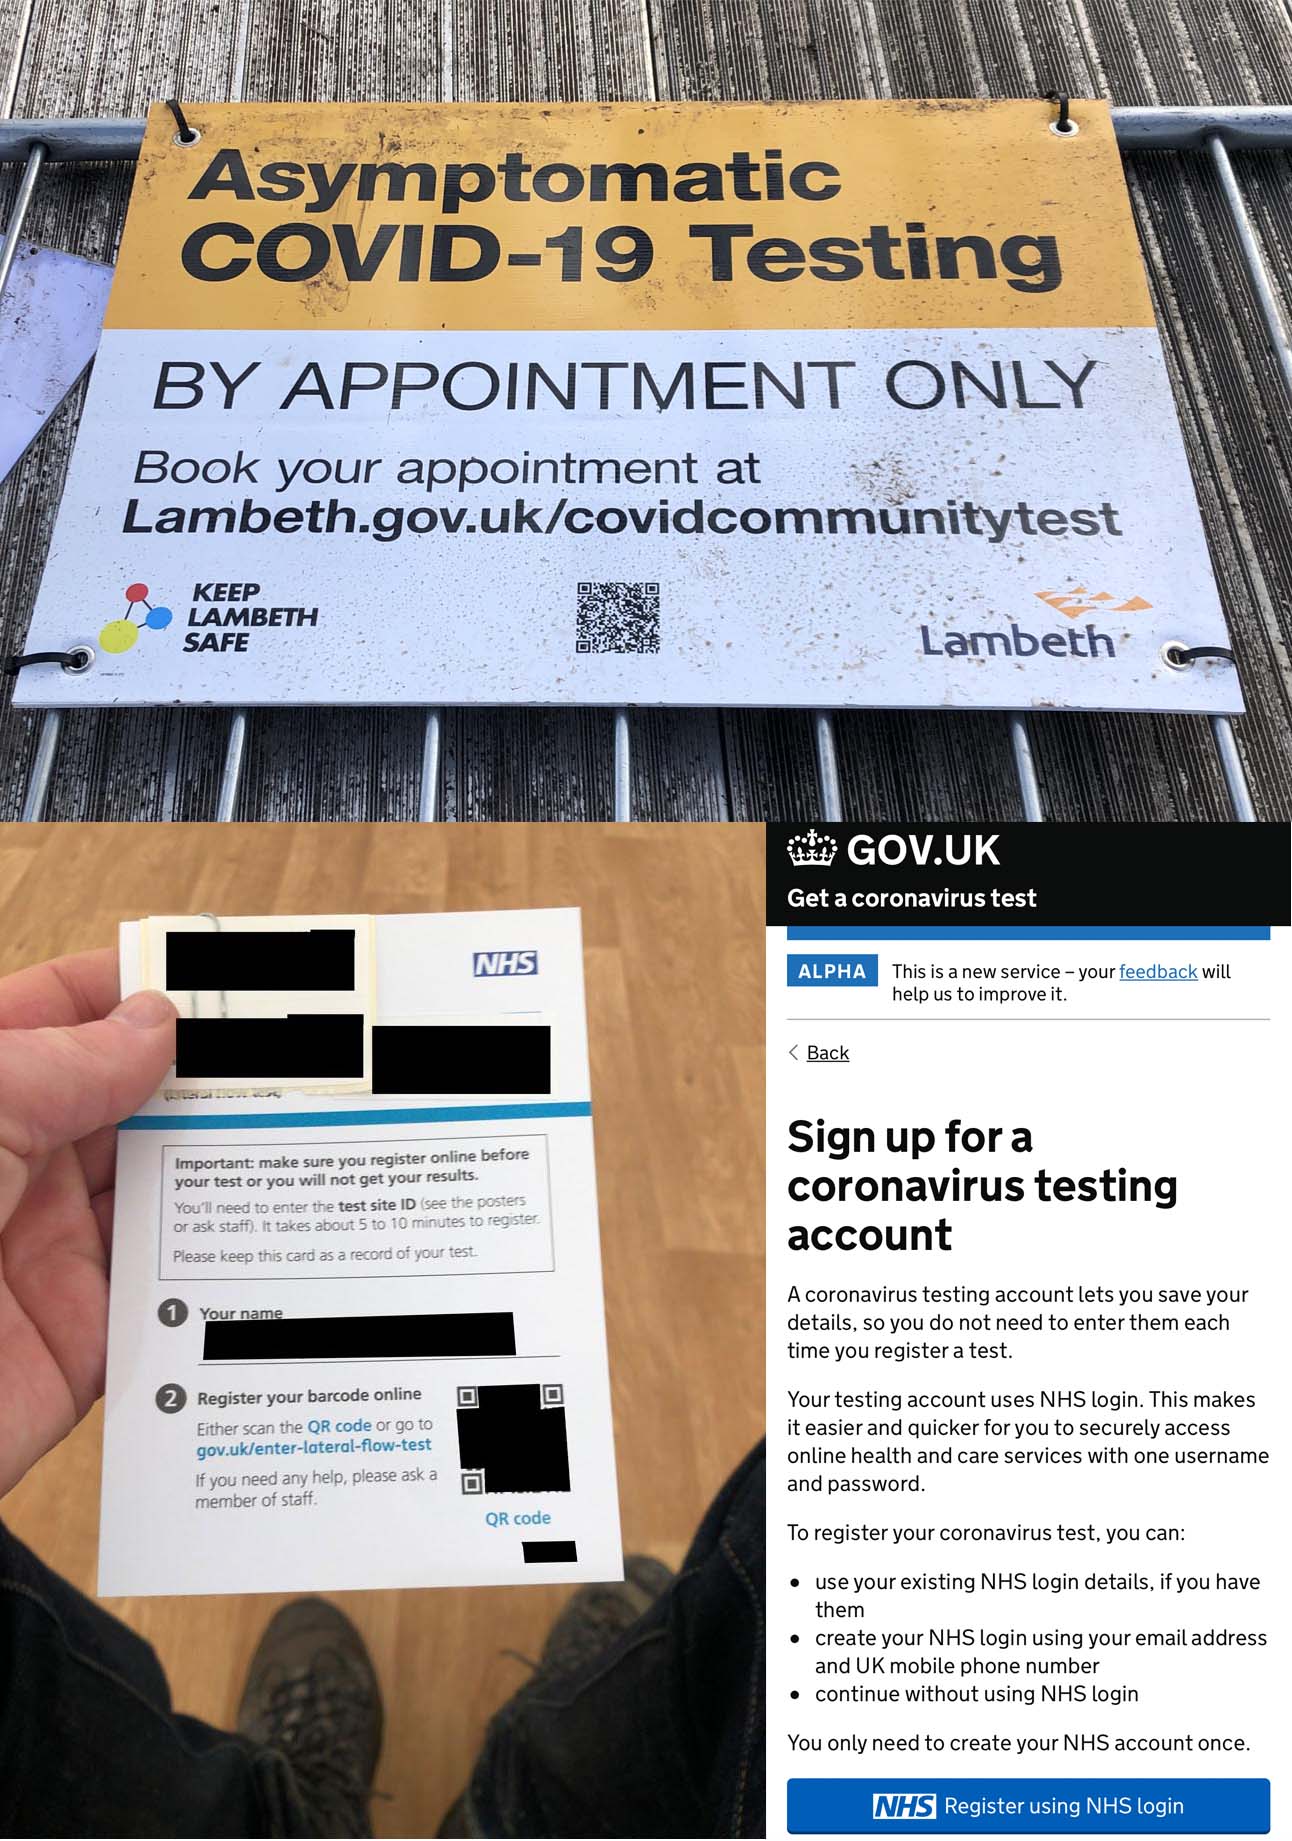 Lambeth Council sign at entrance to test site, an NHS test card with barcode and QR code, and a GOV.UK page with a blue NHS sign-in button